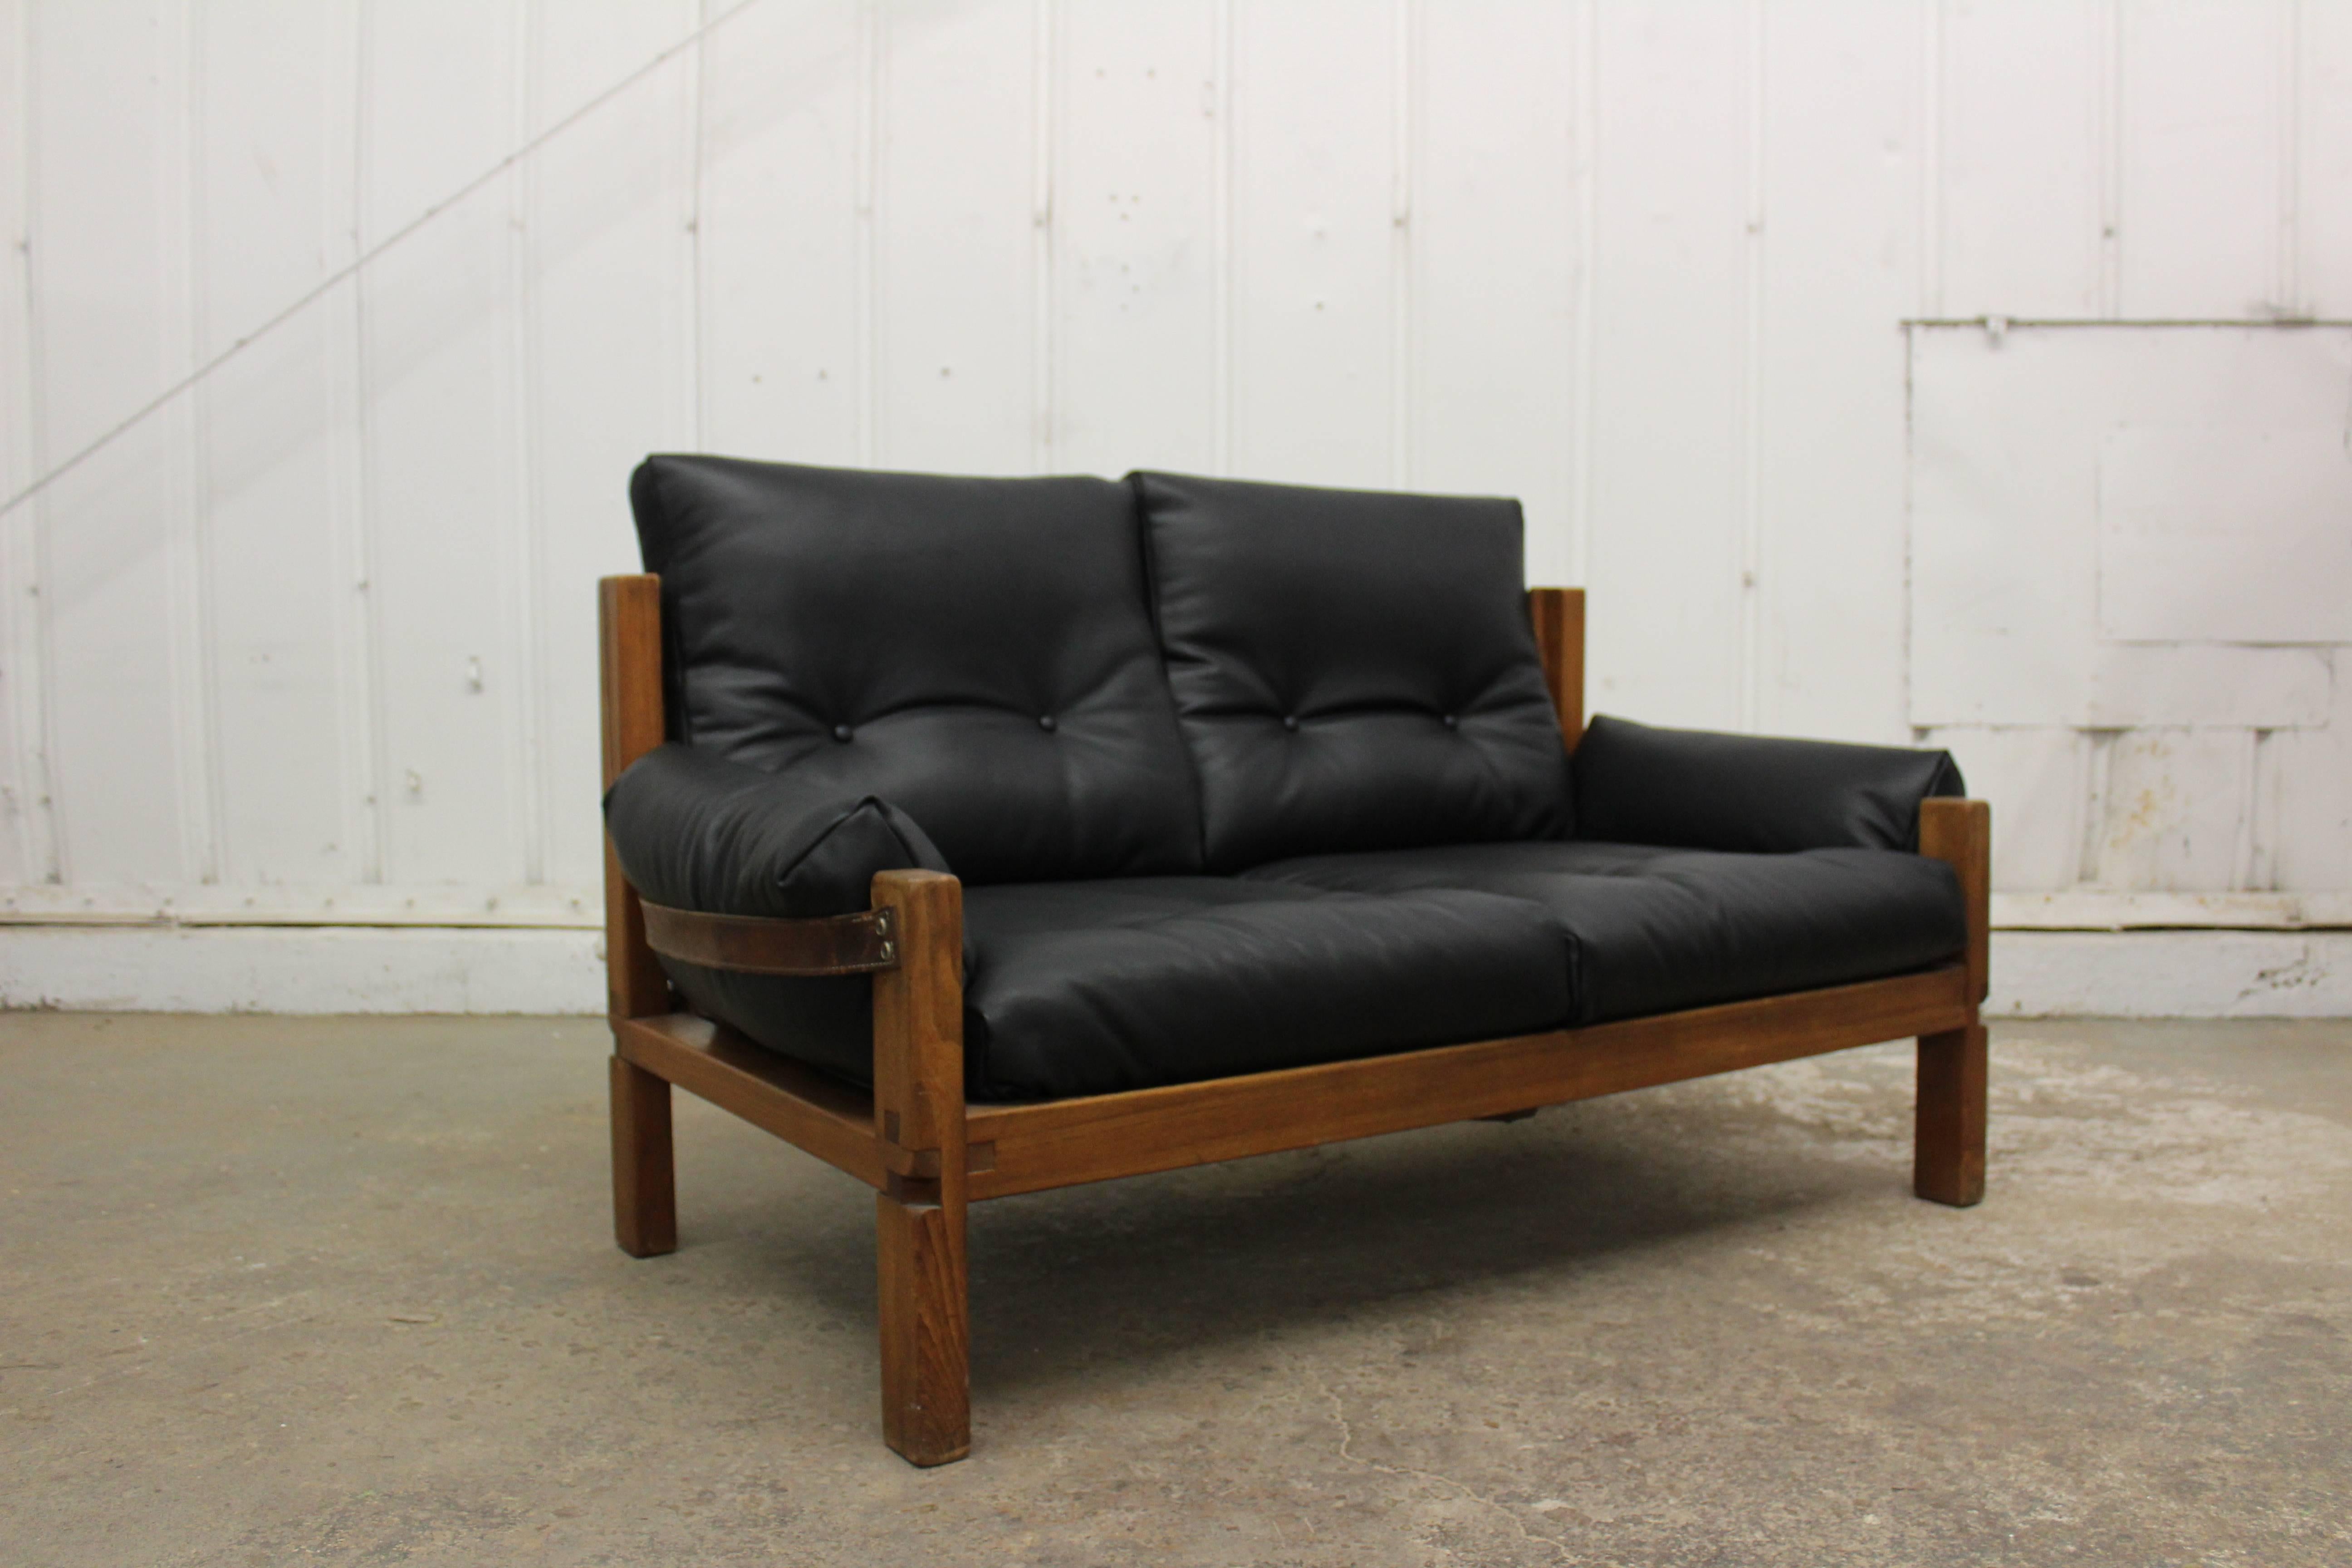 Loveseat designed by Pierre Chapo, France, 1950s. Frame constructed in solid elm and new black leather cushions with original leather straps and hardware.